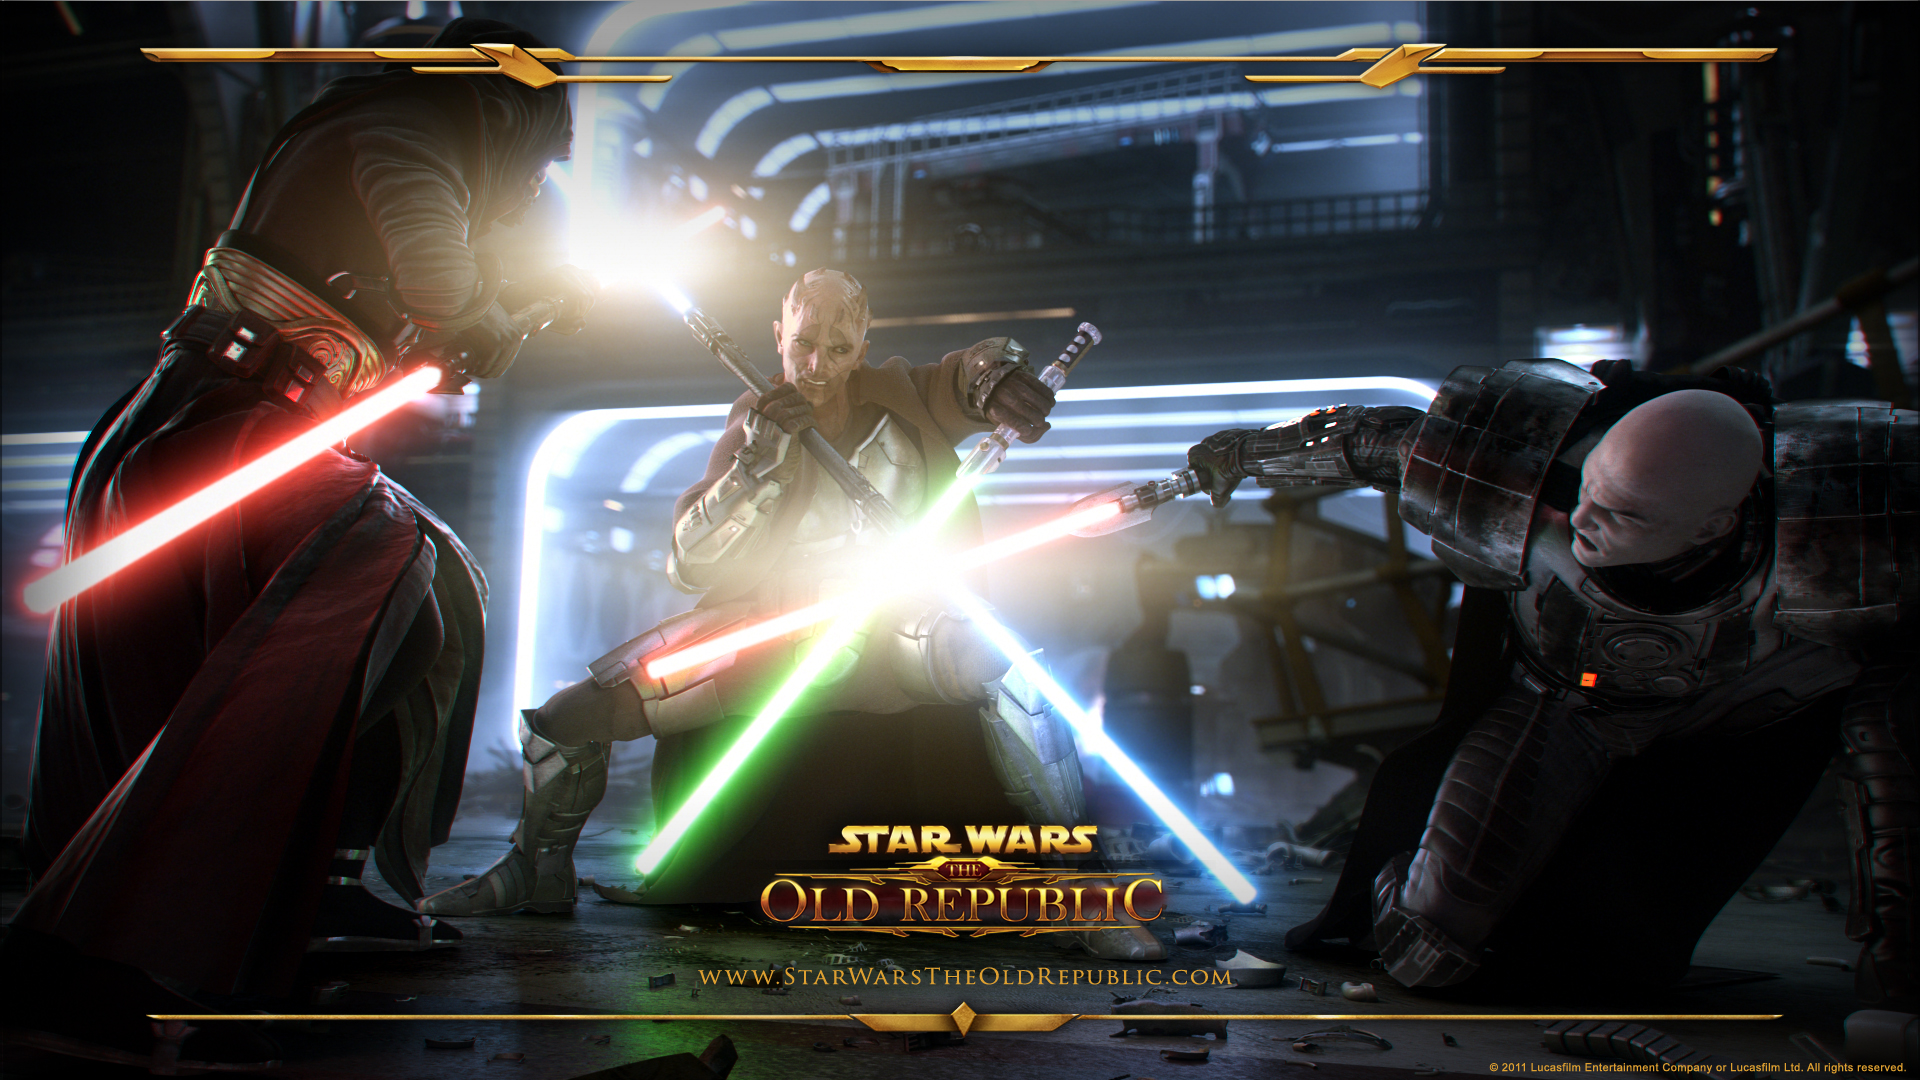 Star Wars The Old Republic - Wallpaper Gallery